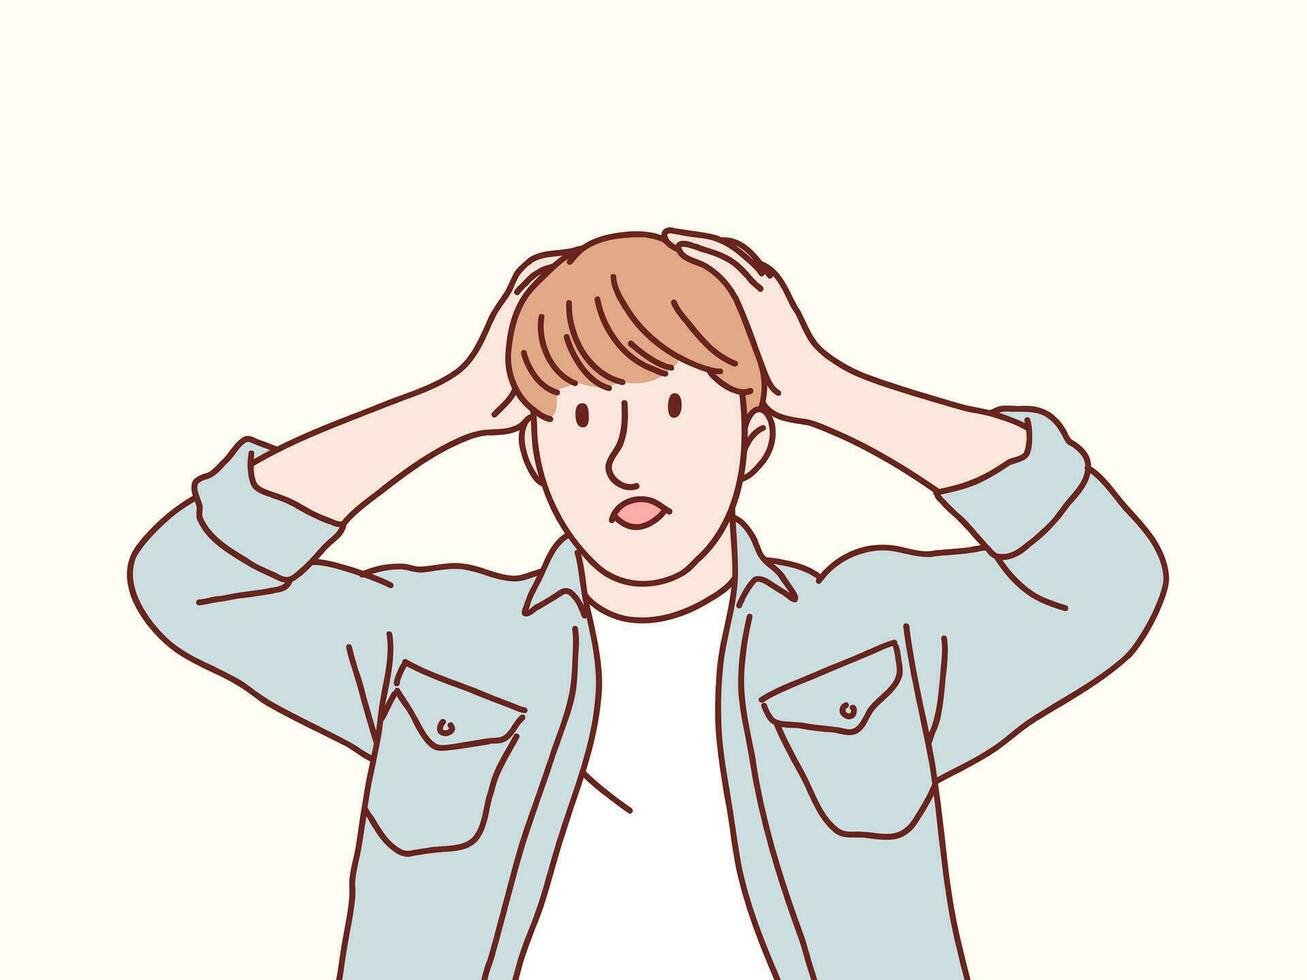 Men are shocked and confused gesture korean style illustration vector